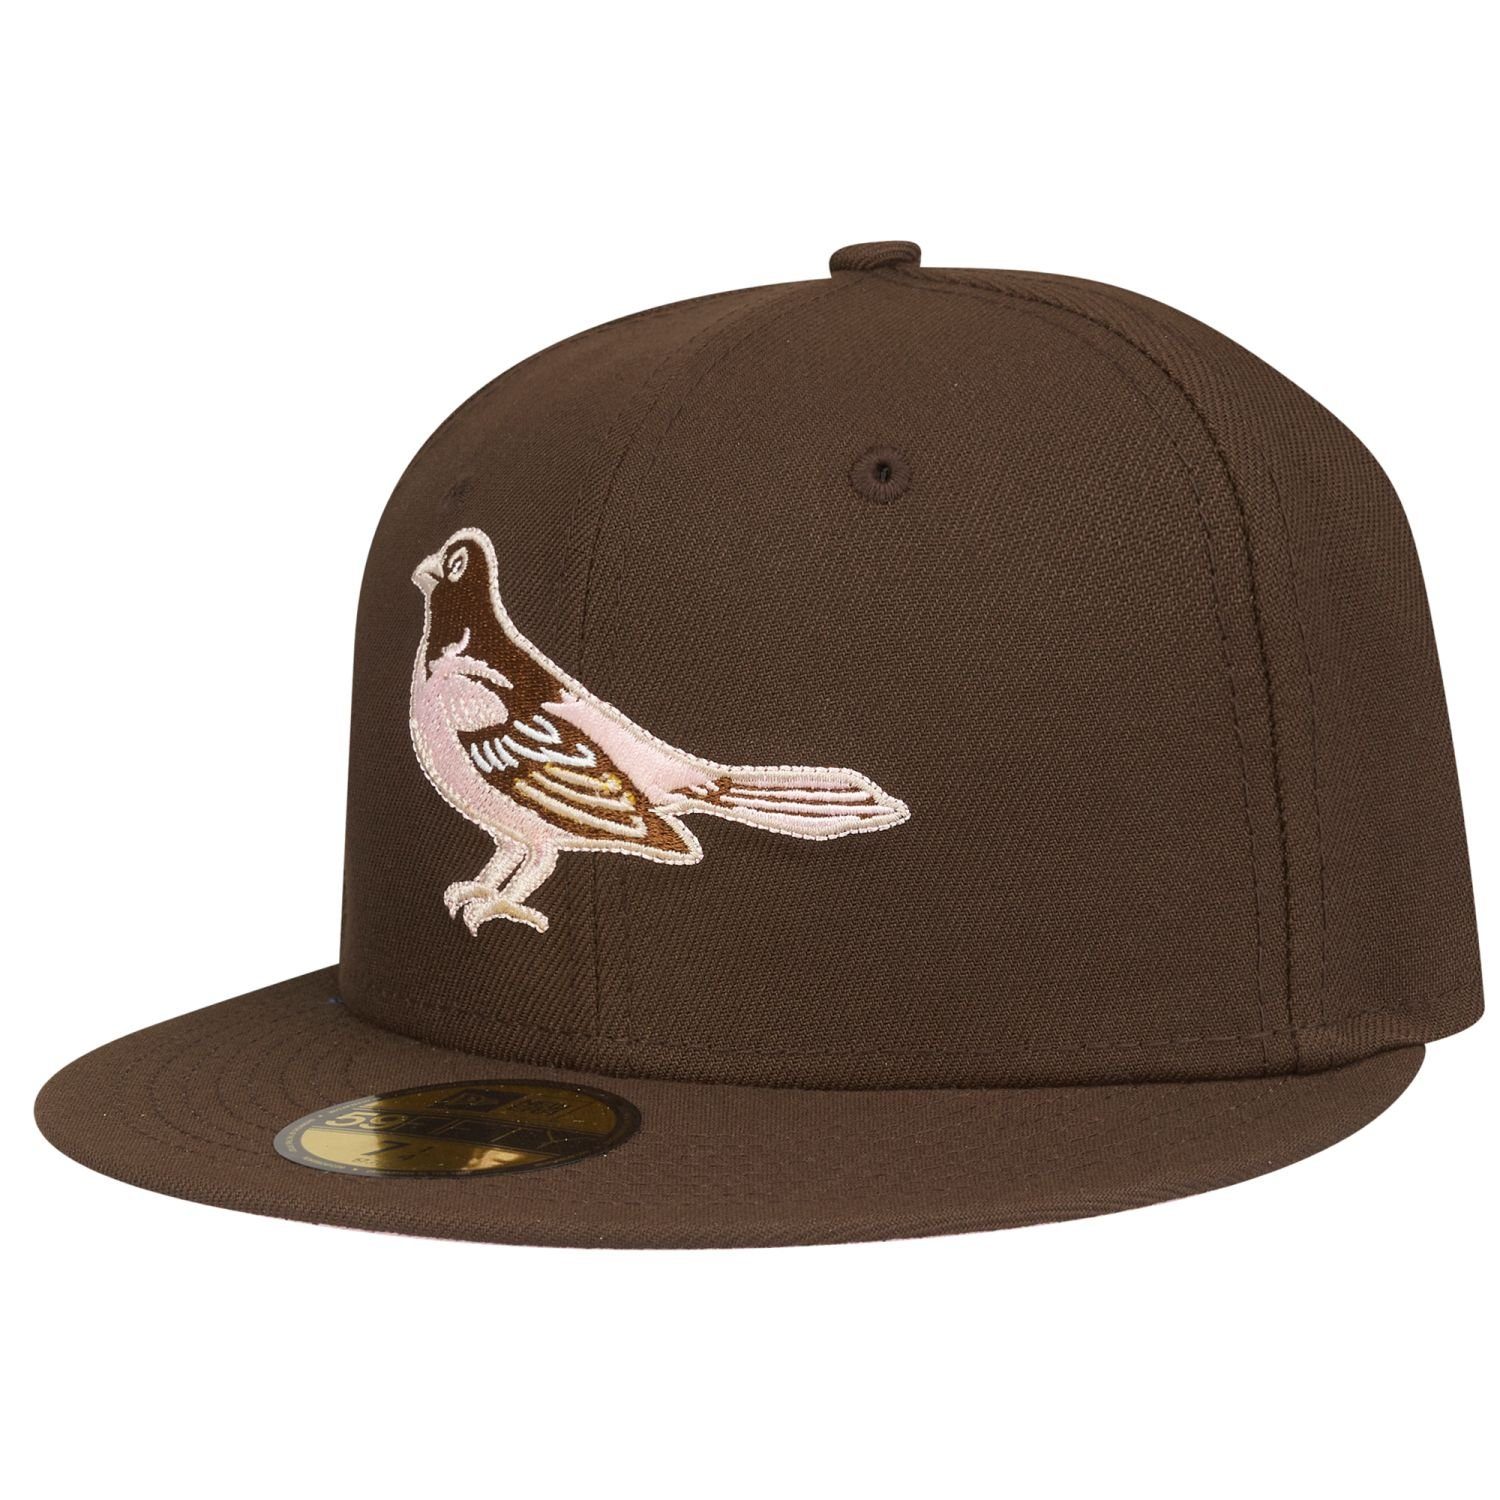 New Era Fitted Cap Baltimore Orioles COOPERSTOWN 59Fifty